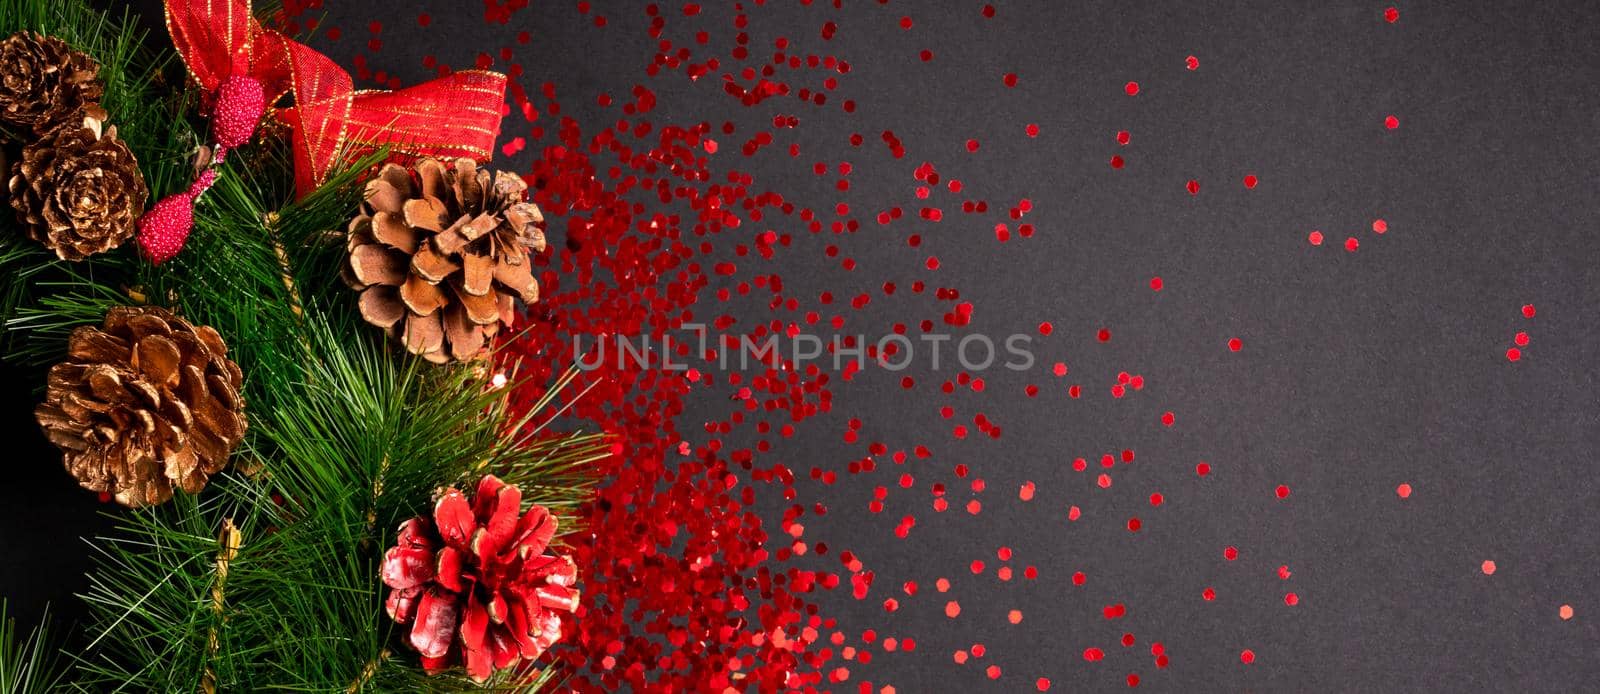 Christmas wreath with red glitter on black background, flat lay with copy space by Mariakray